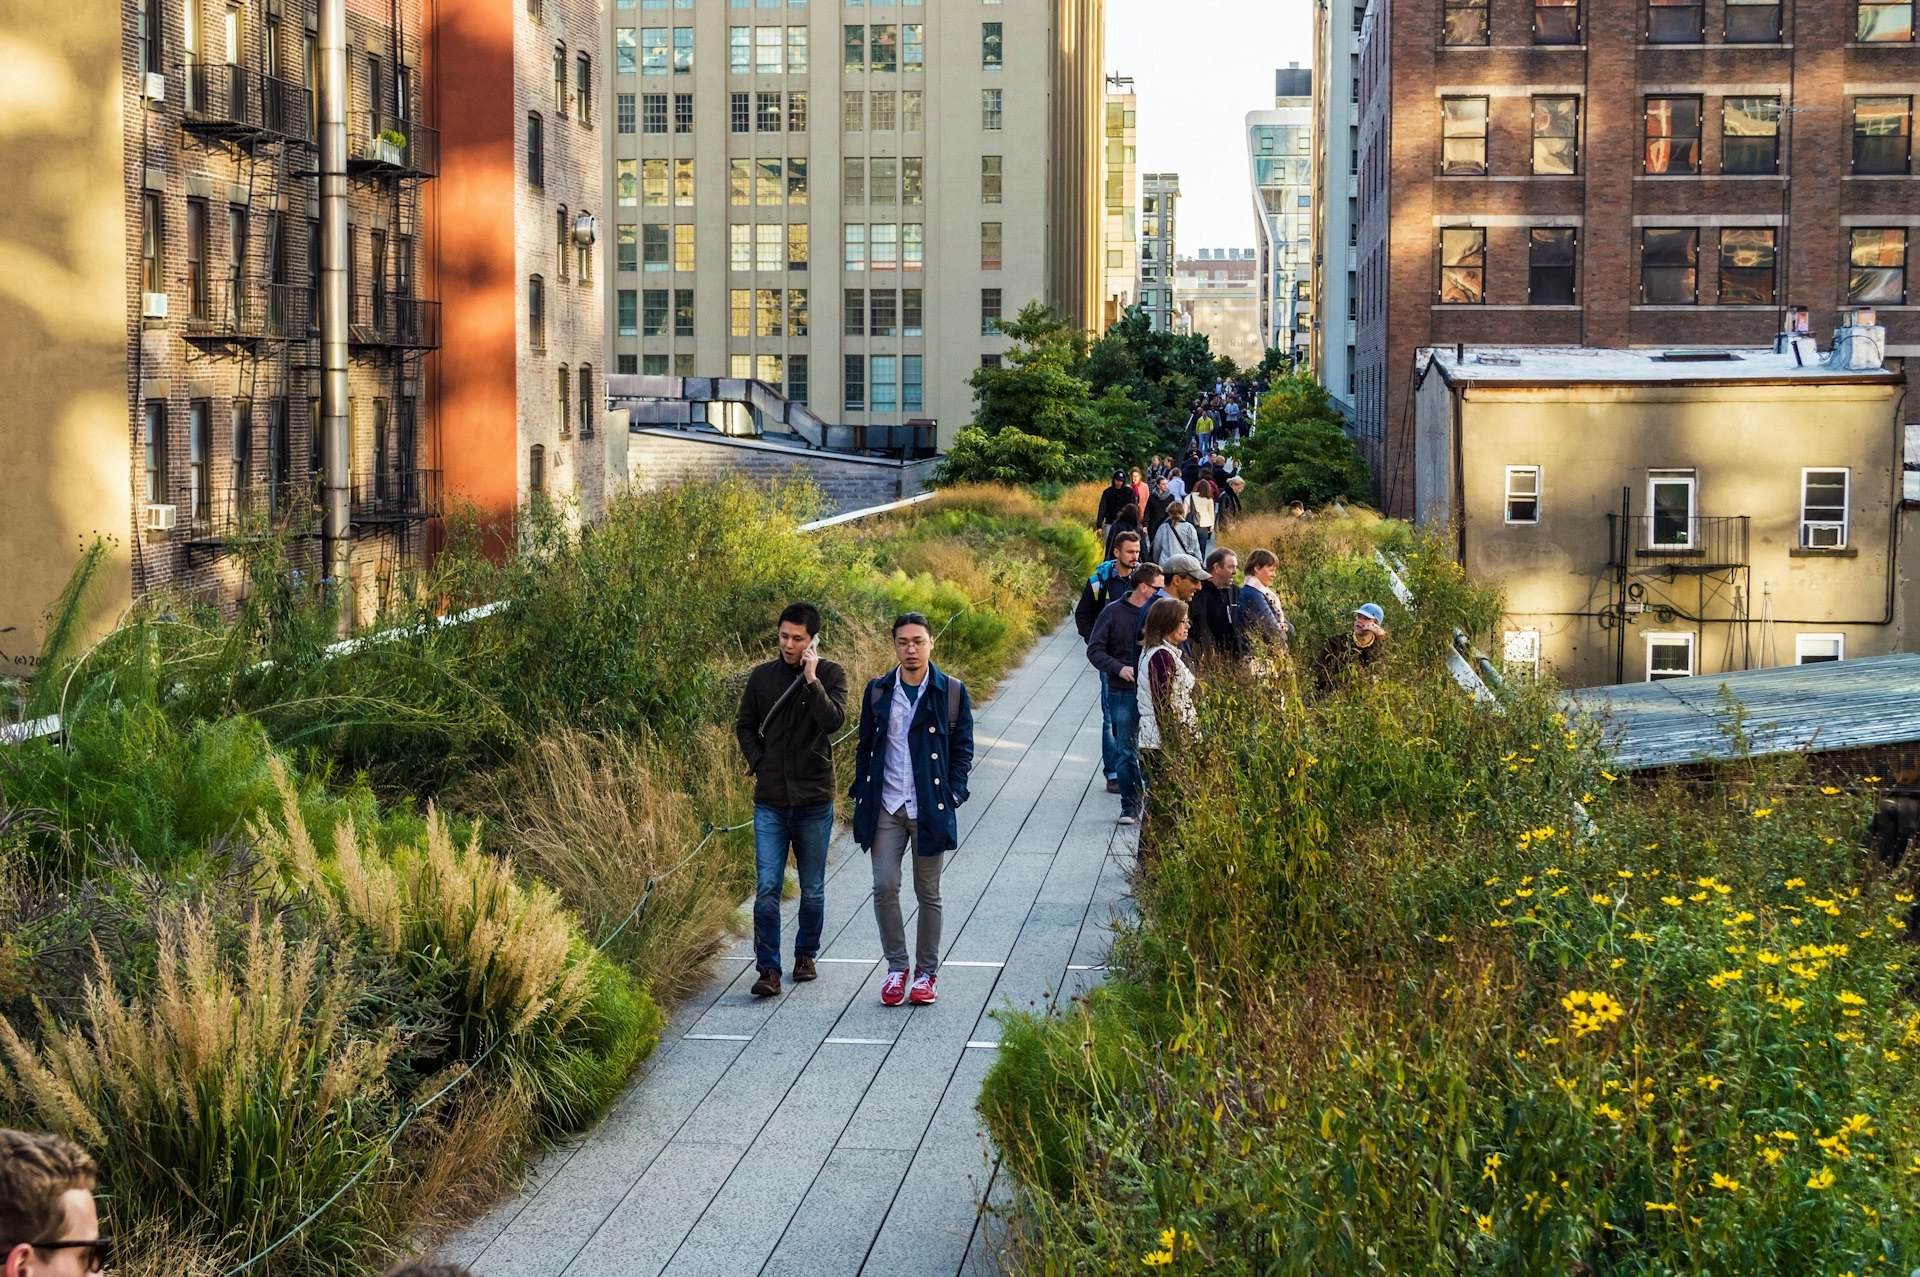 Visitors walking on the High Line, an elevated park in NYC